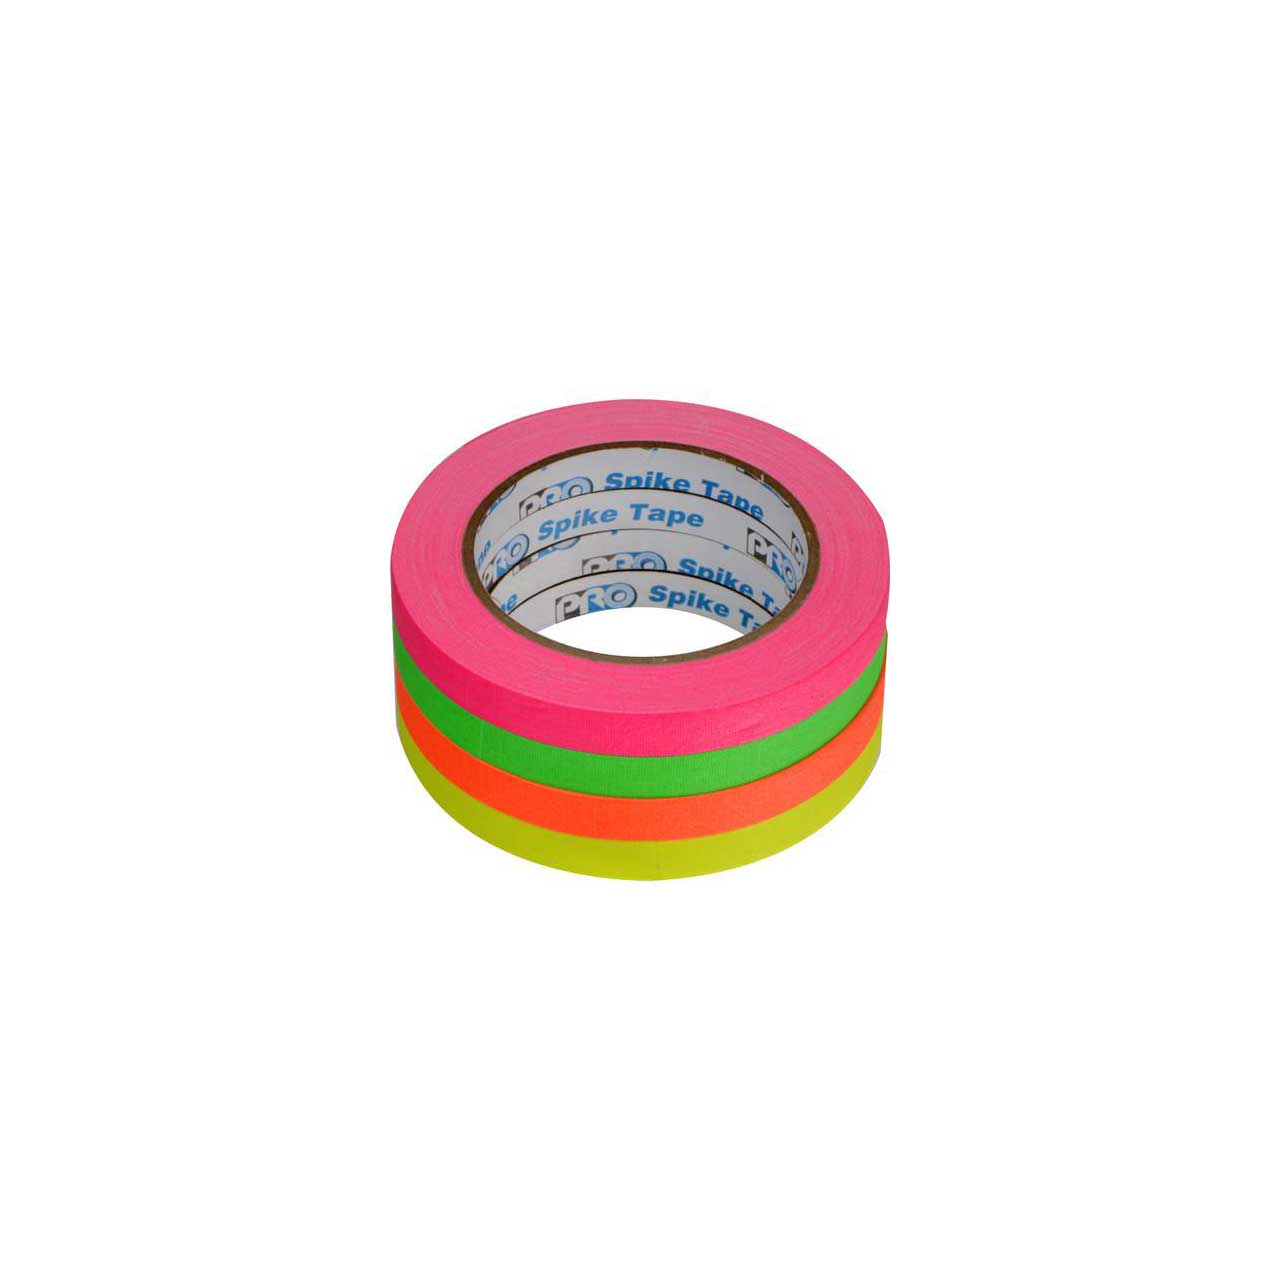 Pro Tapes 1/2-Inch Fluorescent Spike Tape Stack 4pk